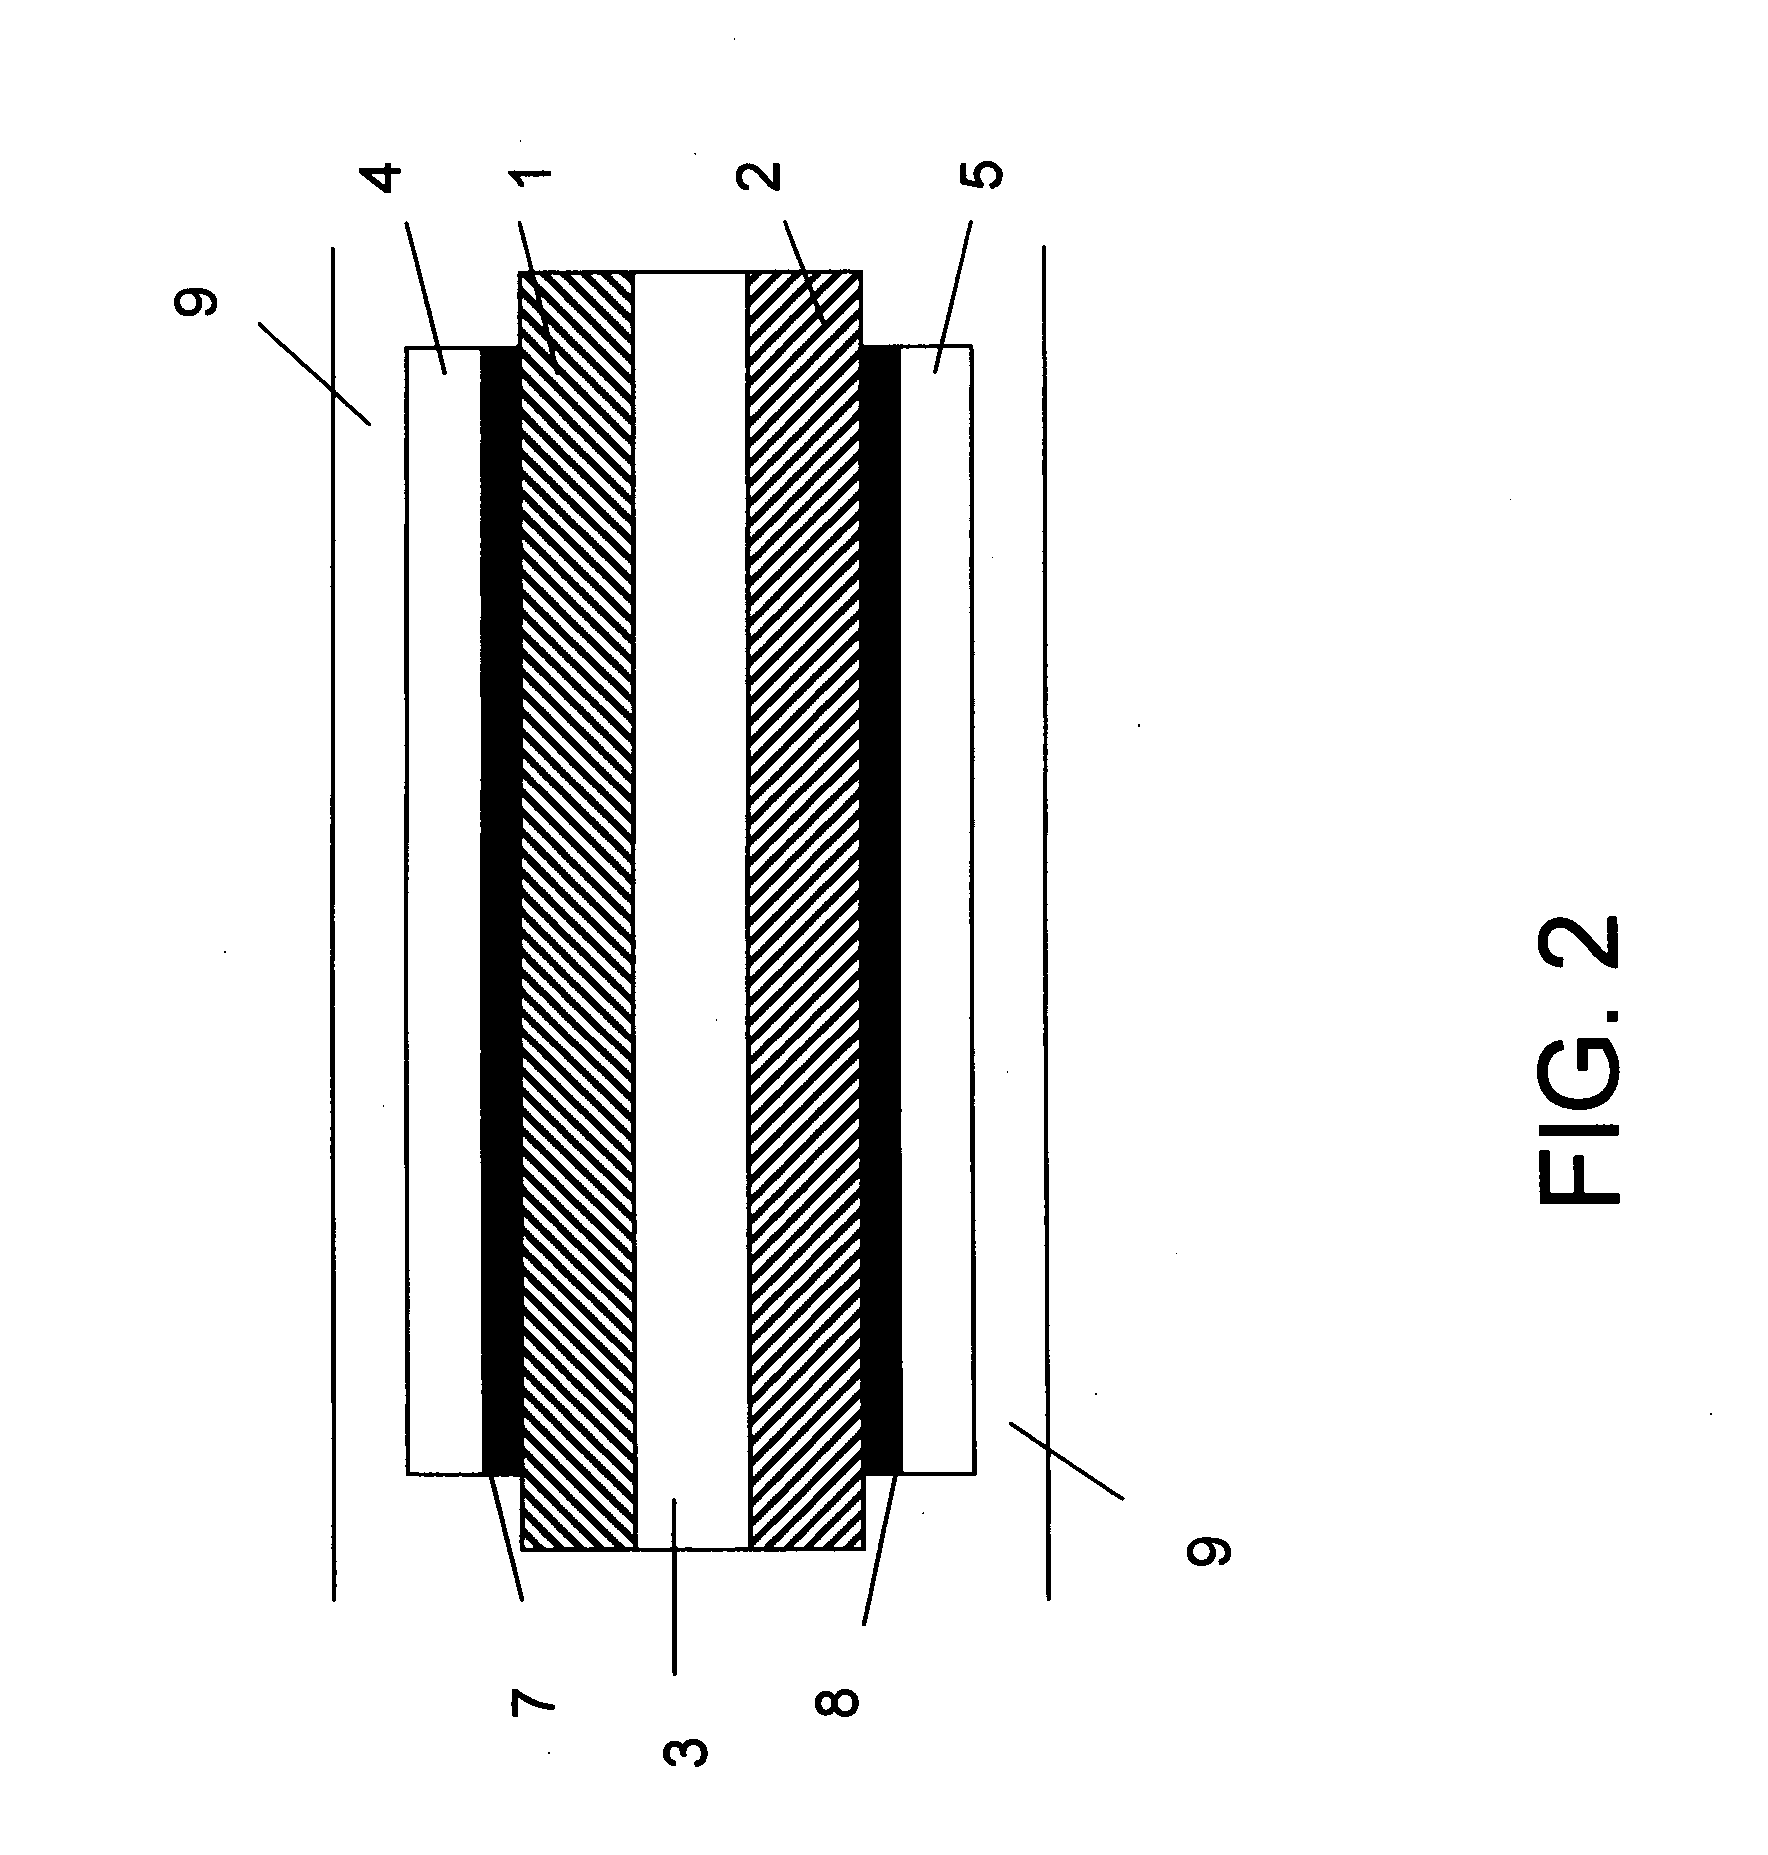 Thin battery and a method of manufacturing a thin battery